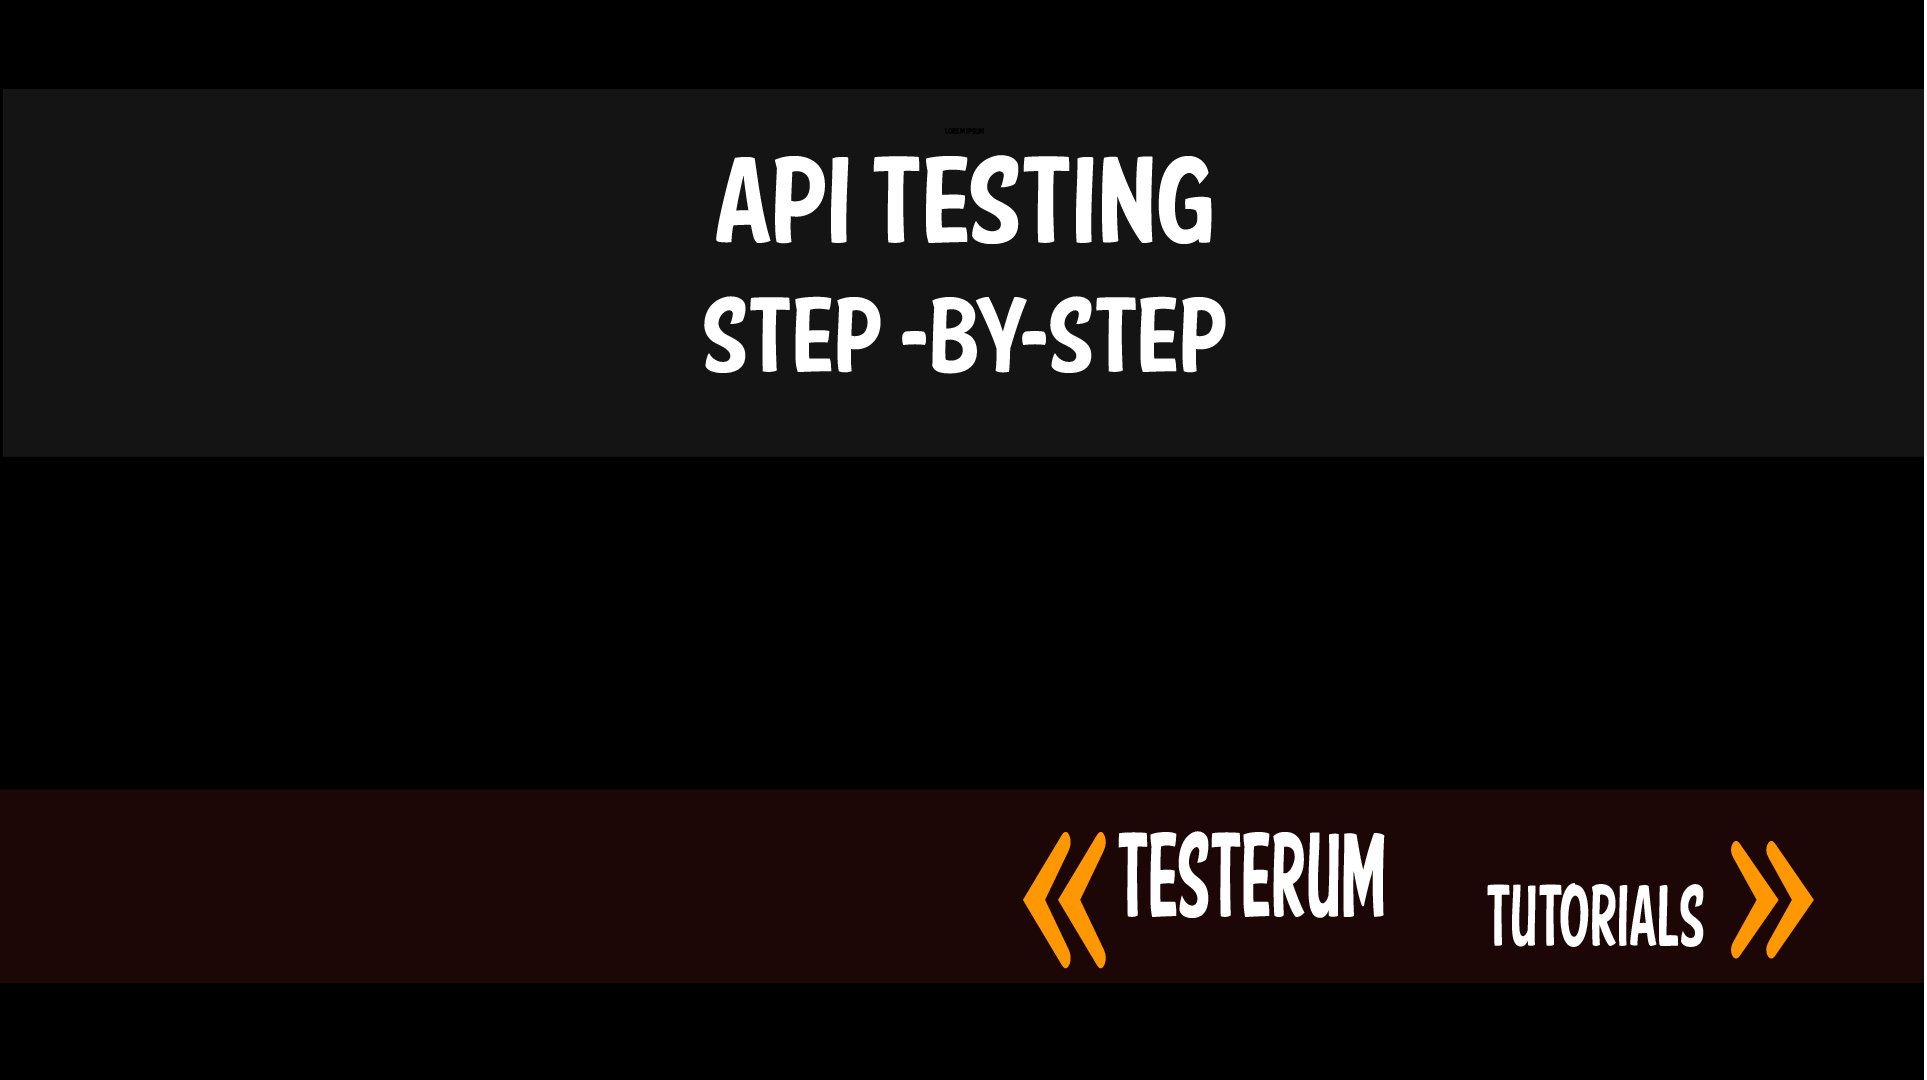 How to automate HTTP / REST testing